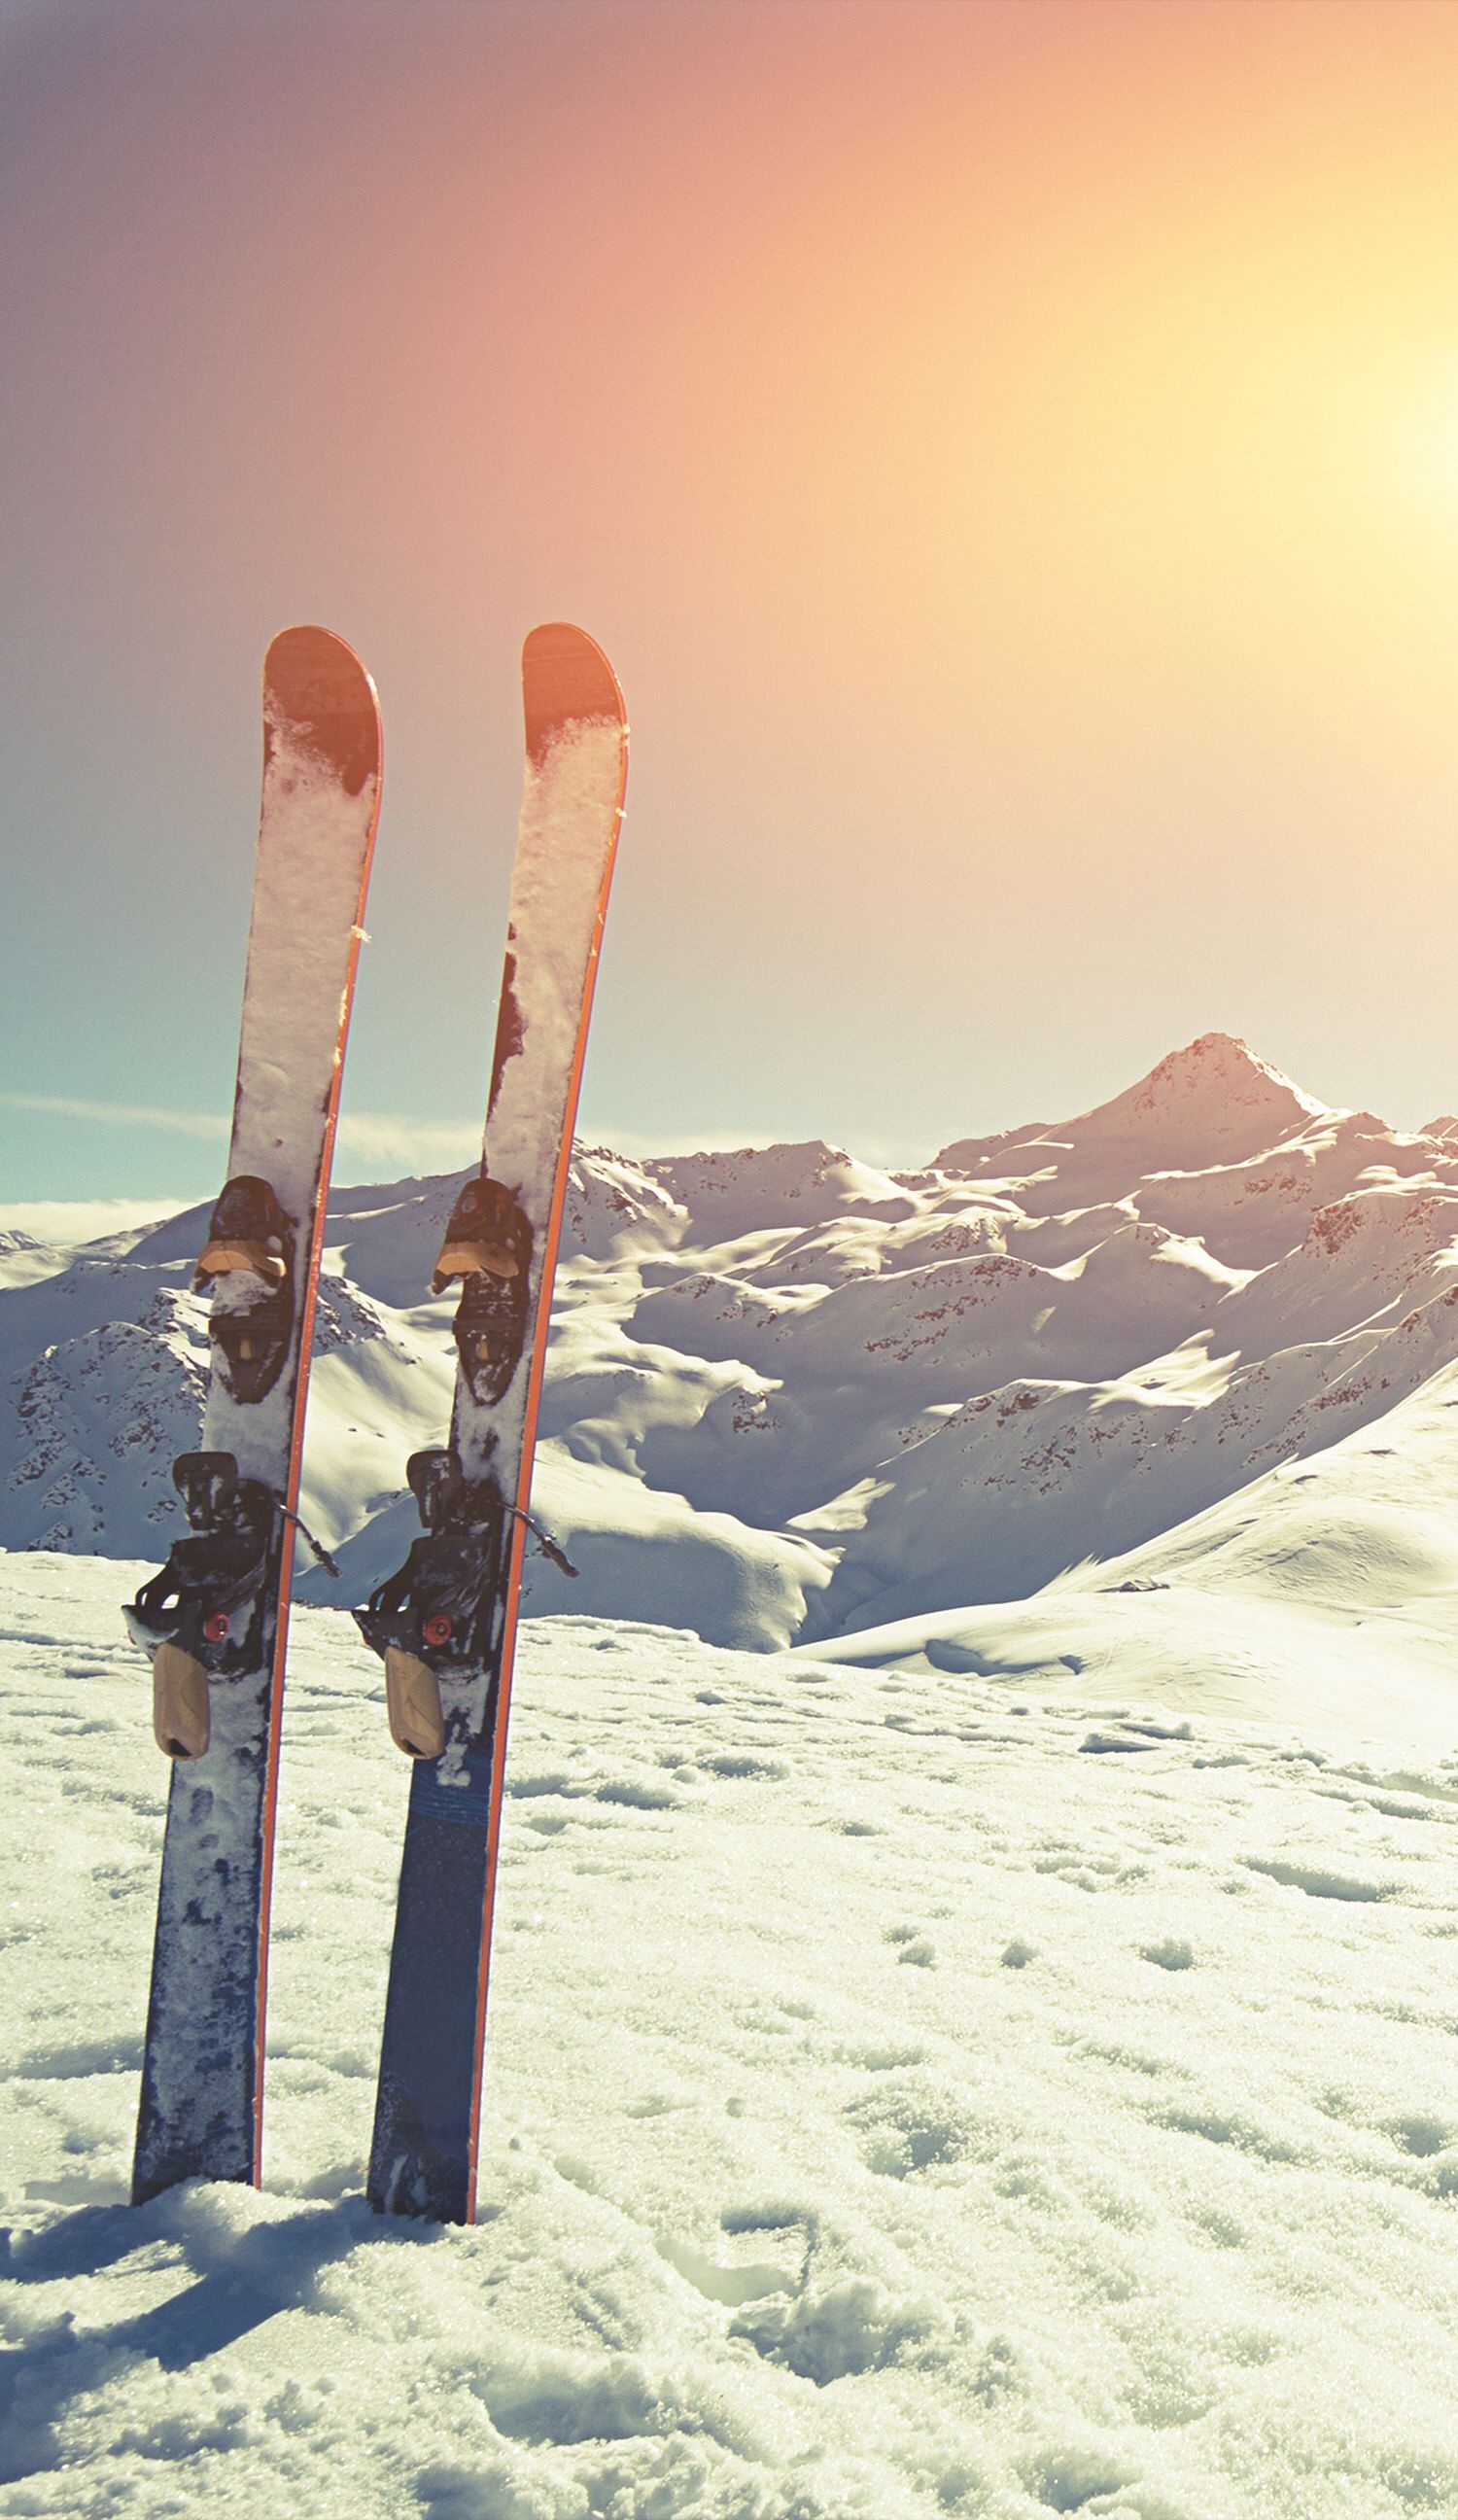 Skiing: Snow, Winter sports equipment, Passing the distance on a snow track. 1500x2600 HD Wallpaper.